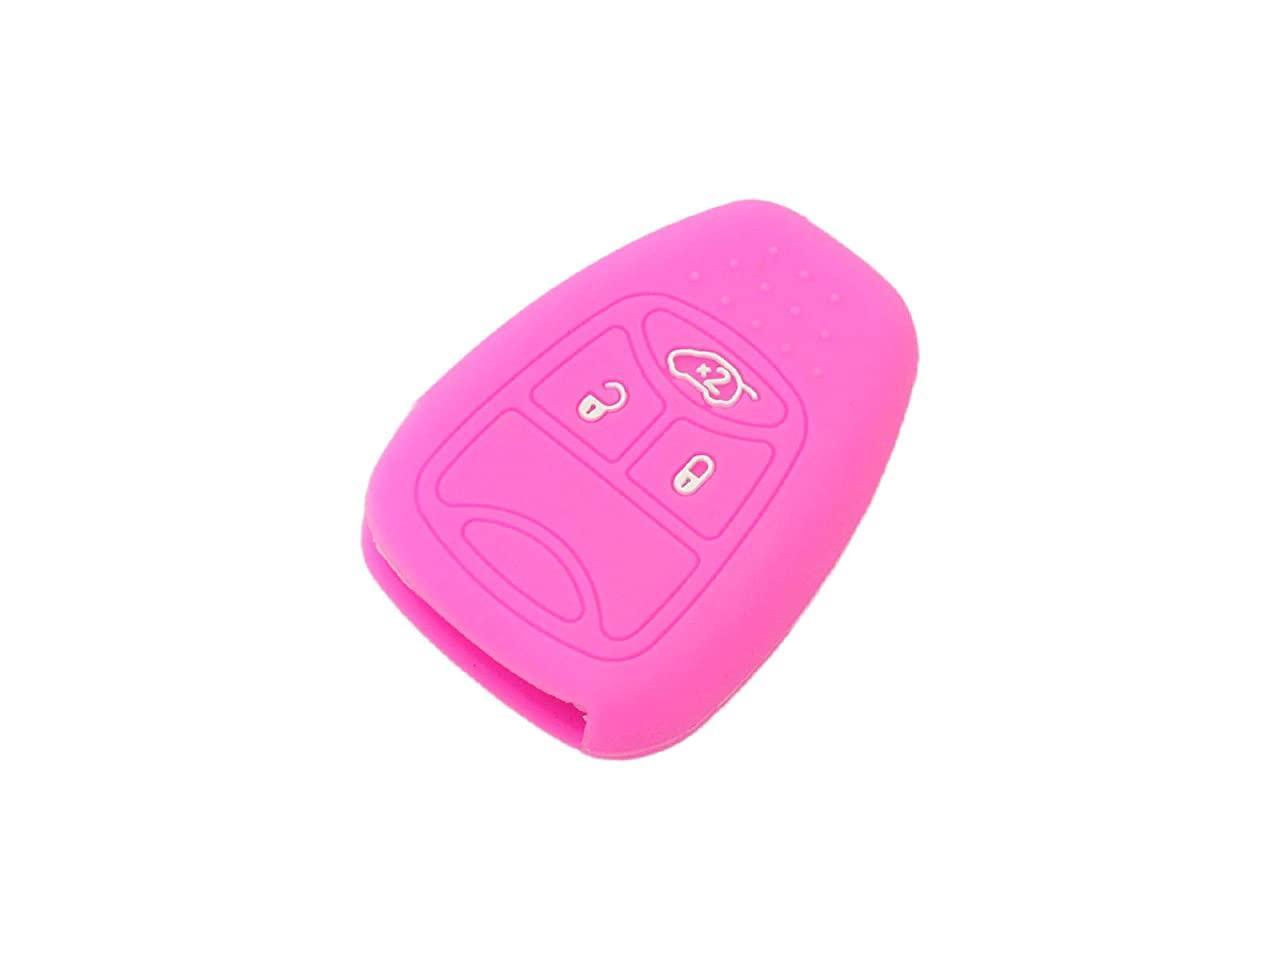 Silicone Skin Cover fit for CHRYSLER DODGE JEEP Remote Key Case Fob CV4751 DP 